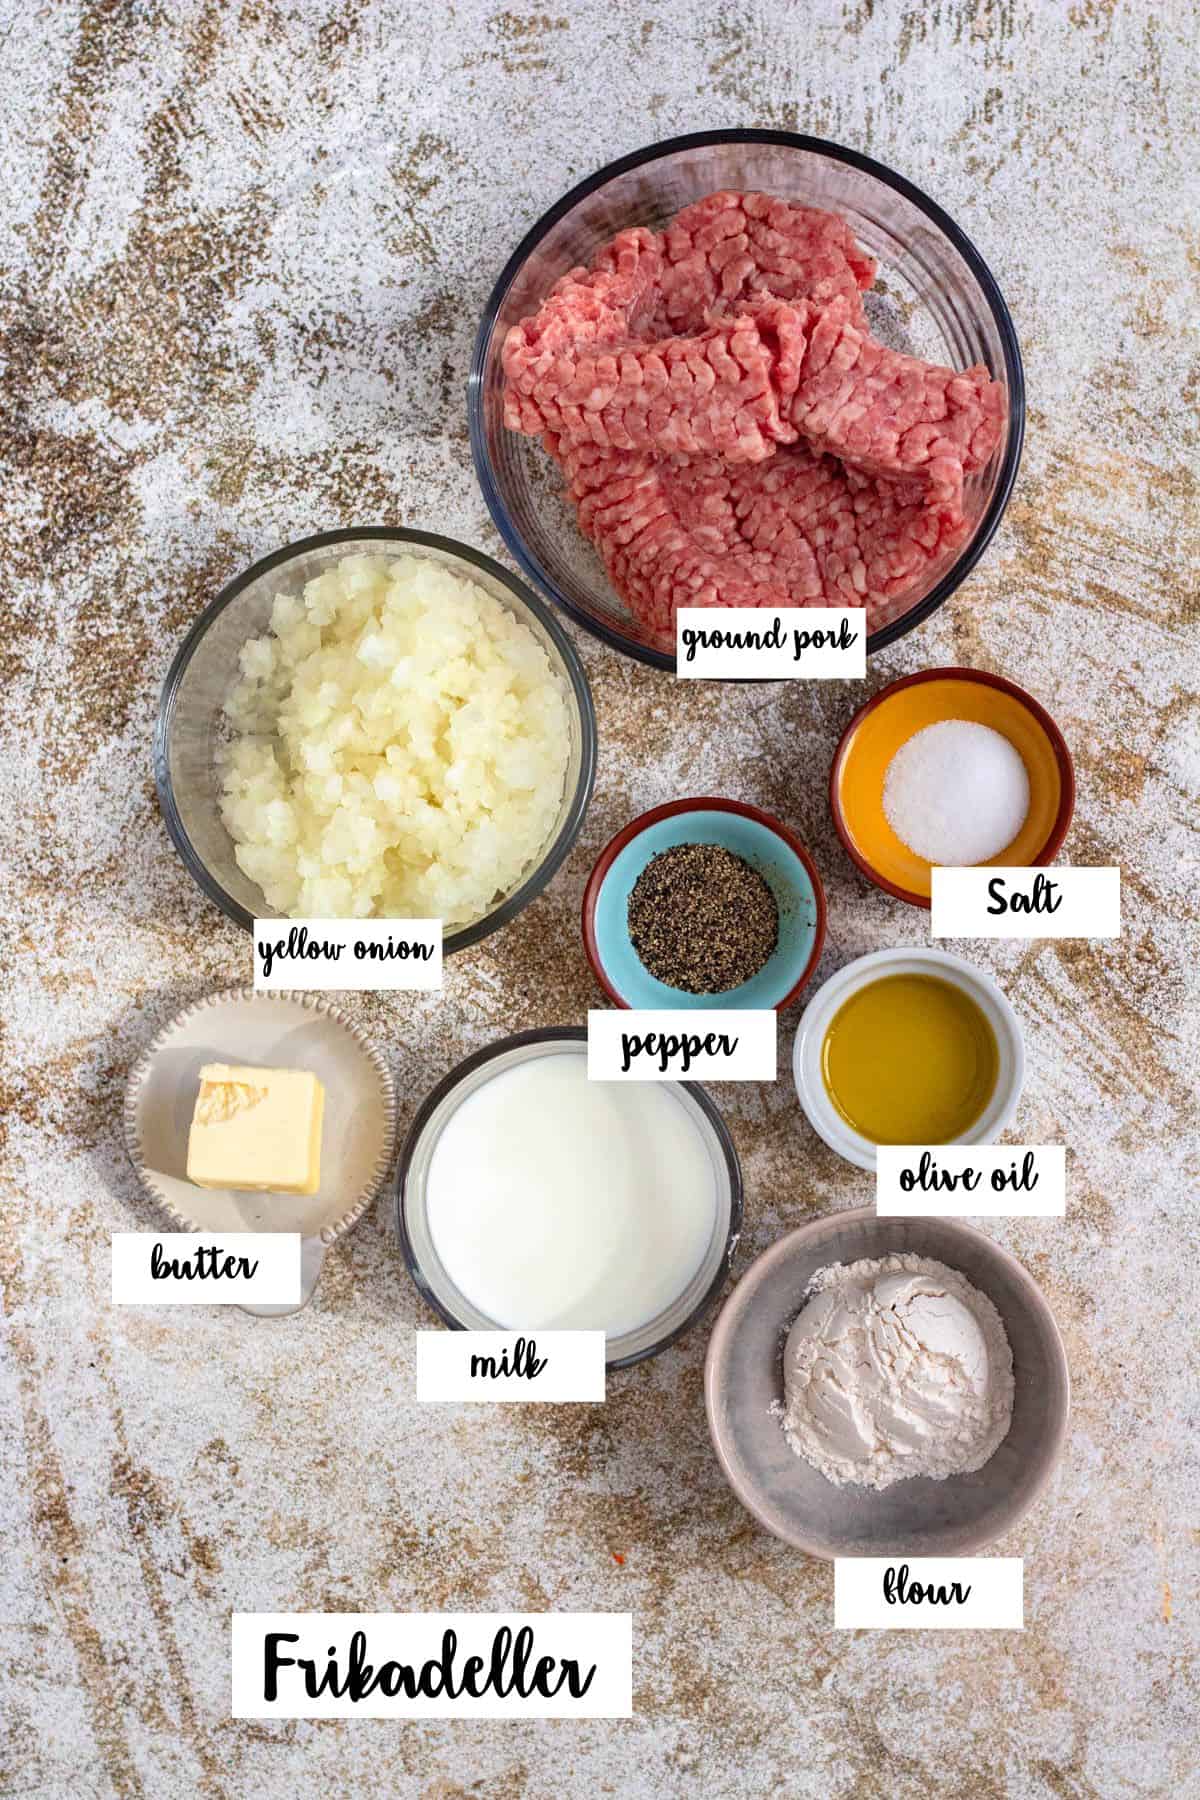 Ingredients shown are used to prepare Frikadeller recipes. 